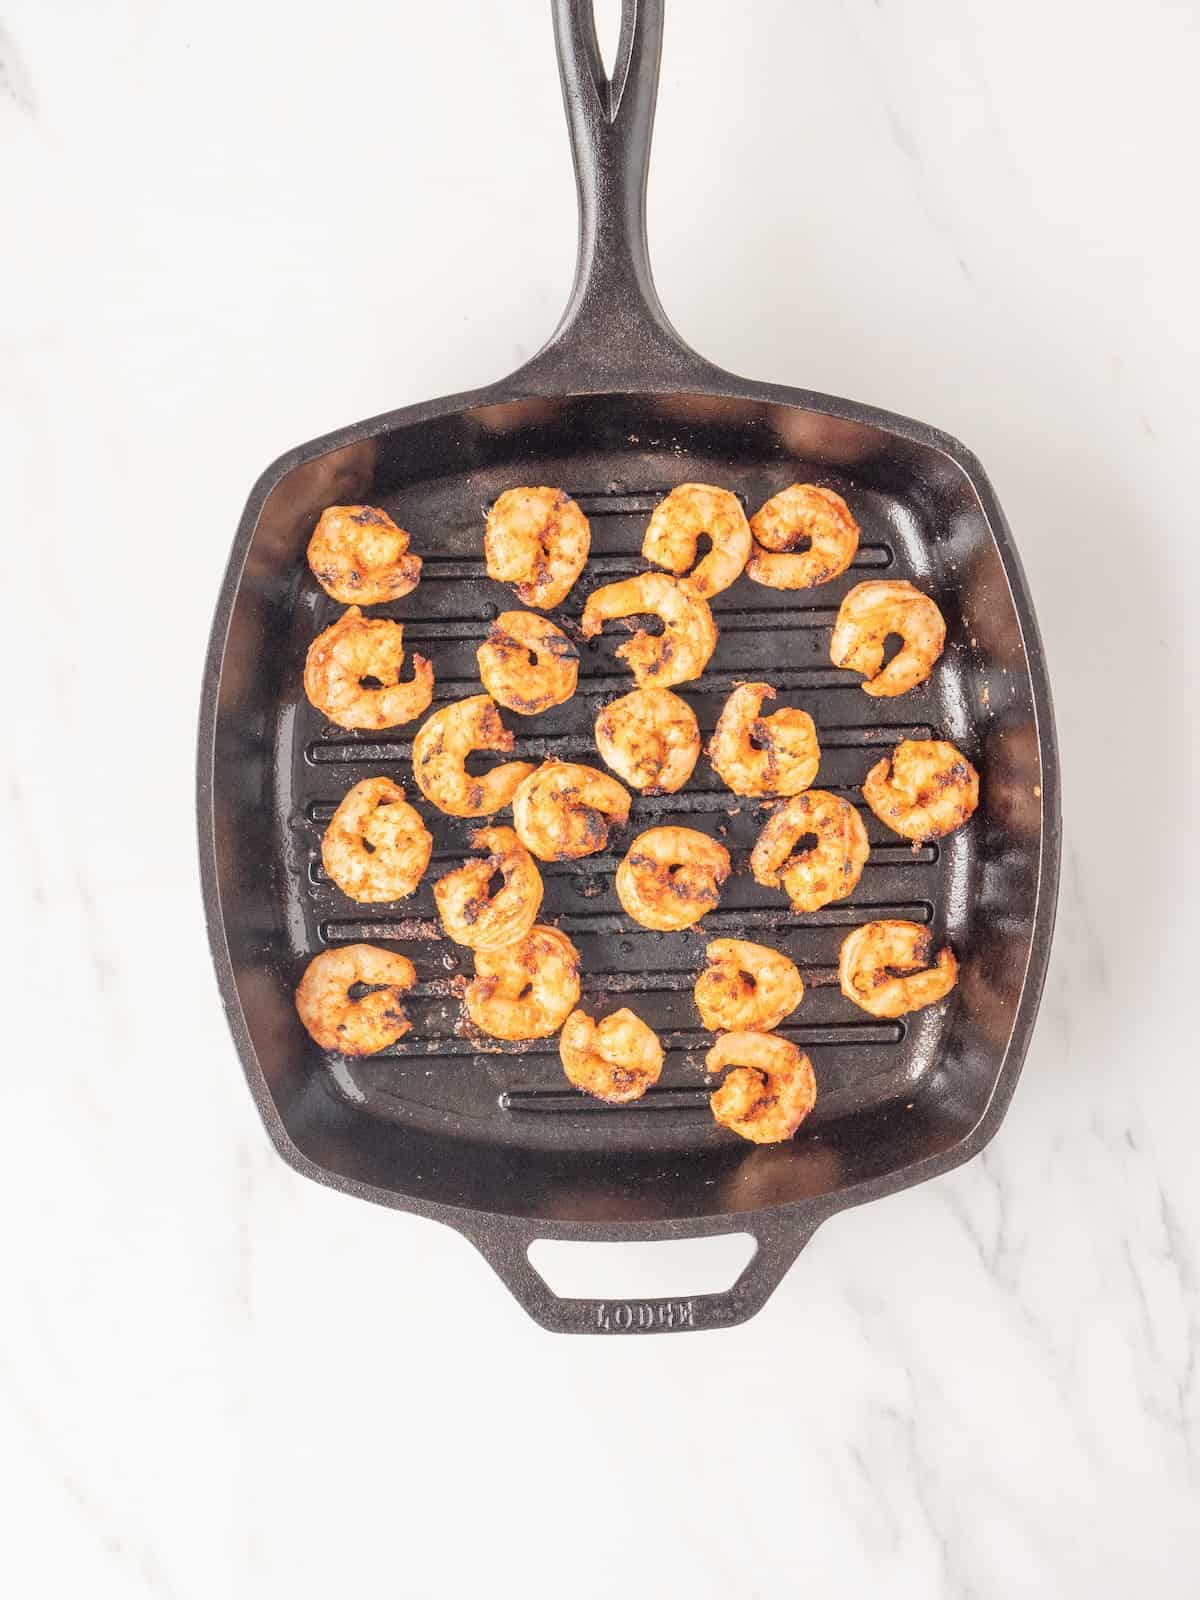 A square grill pan with shrimp being grilled on it.